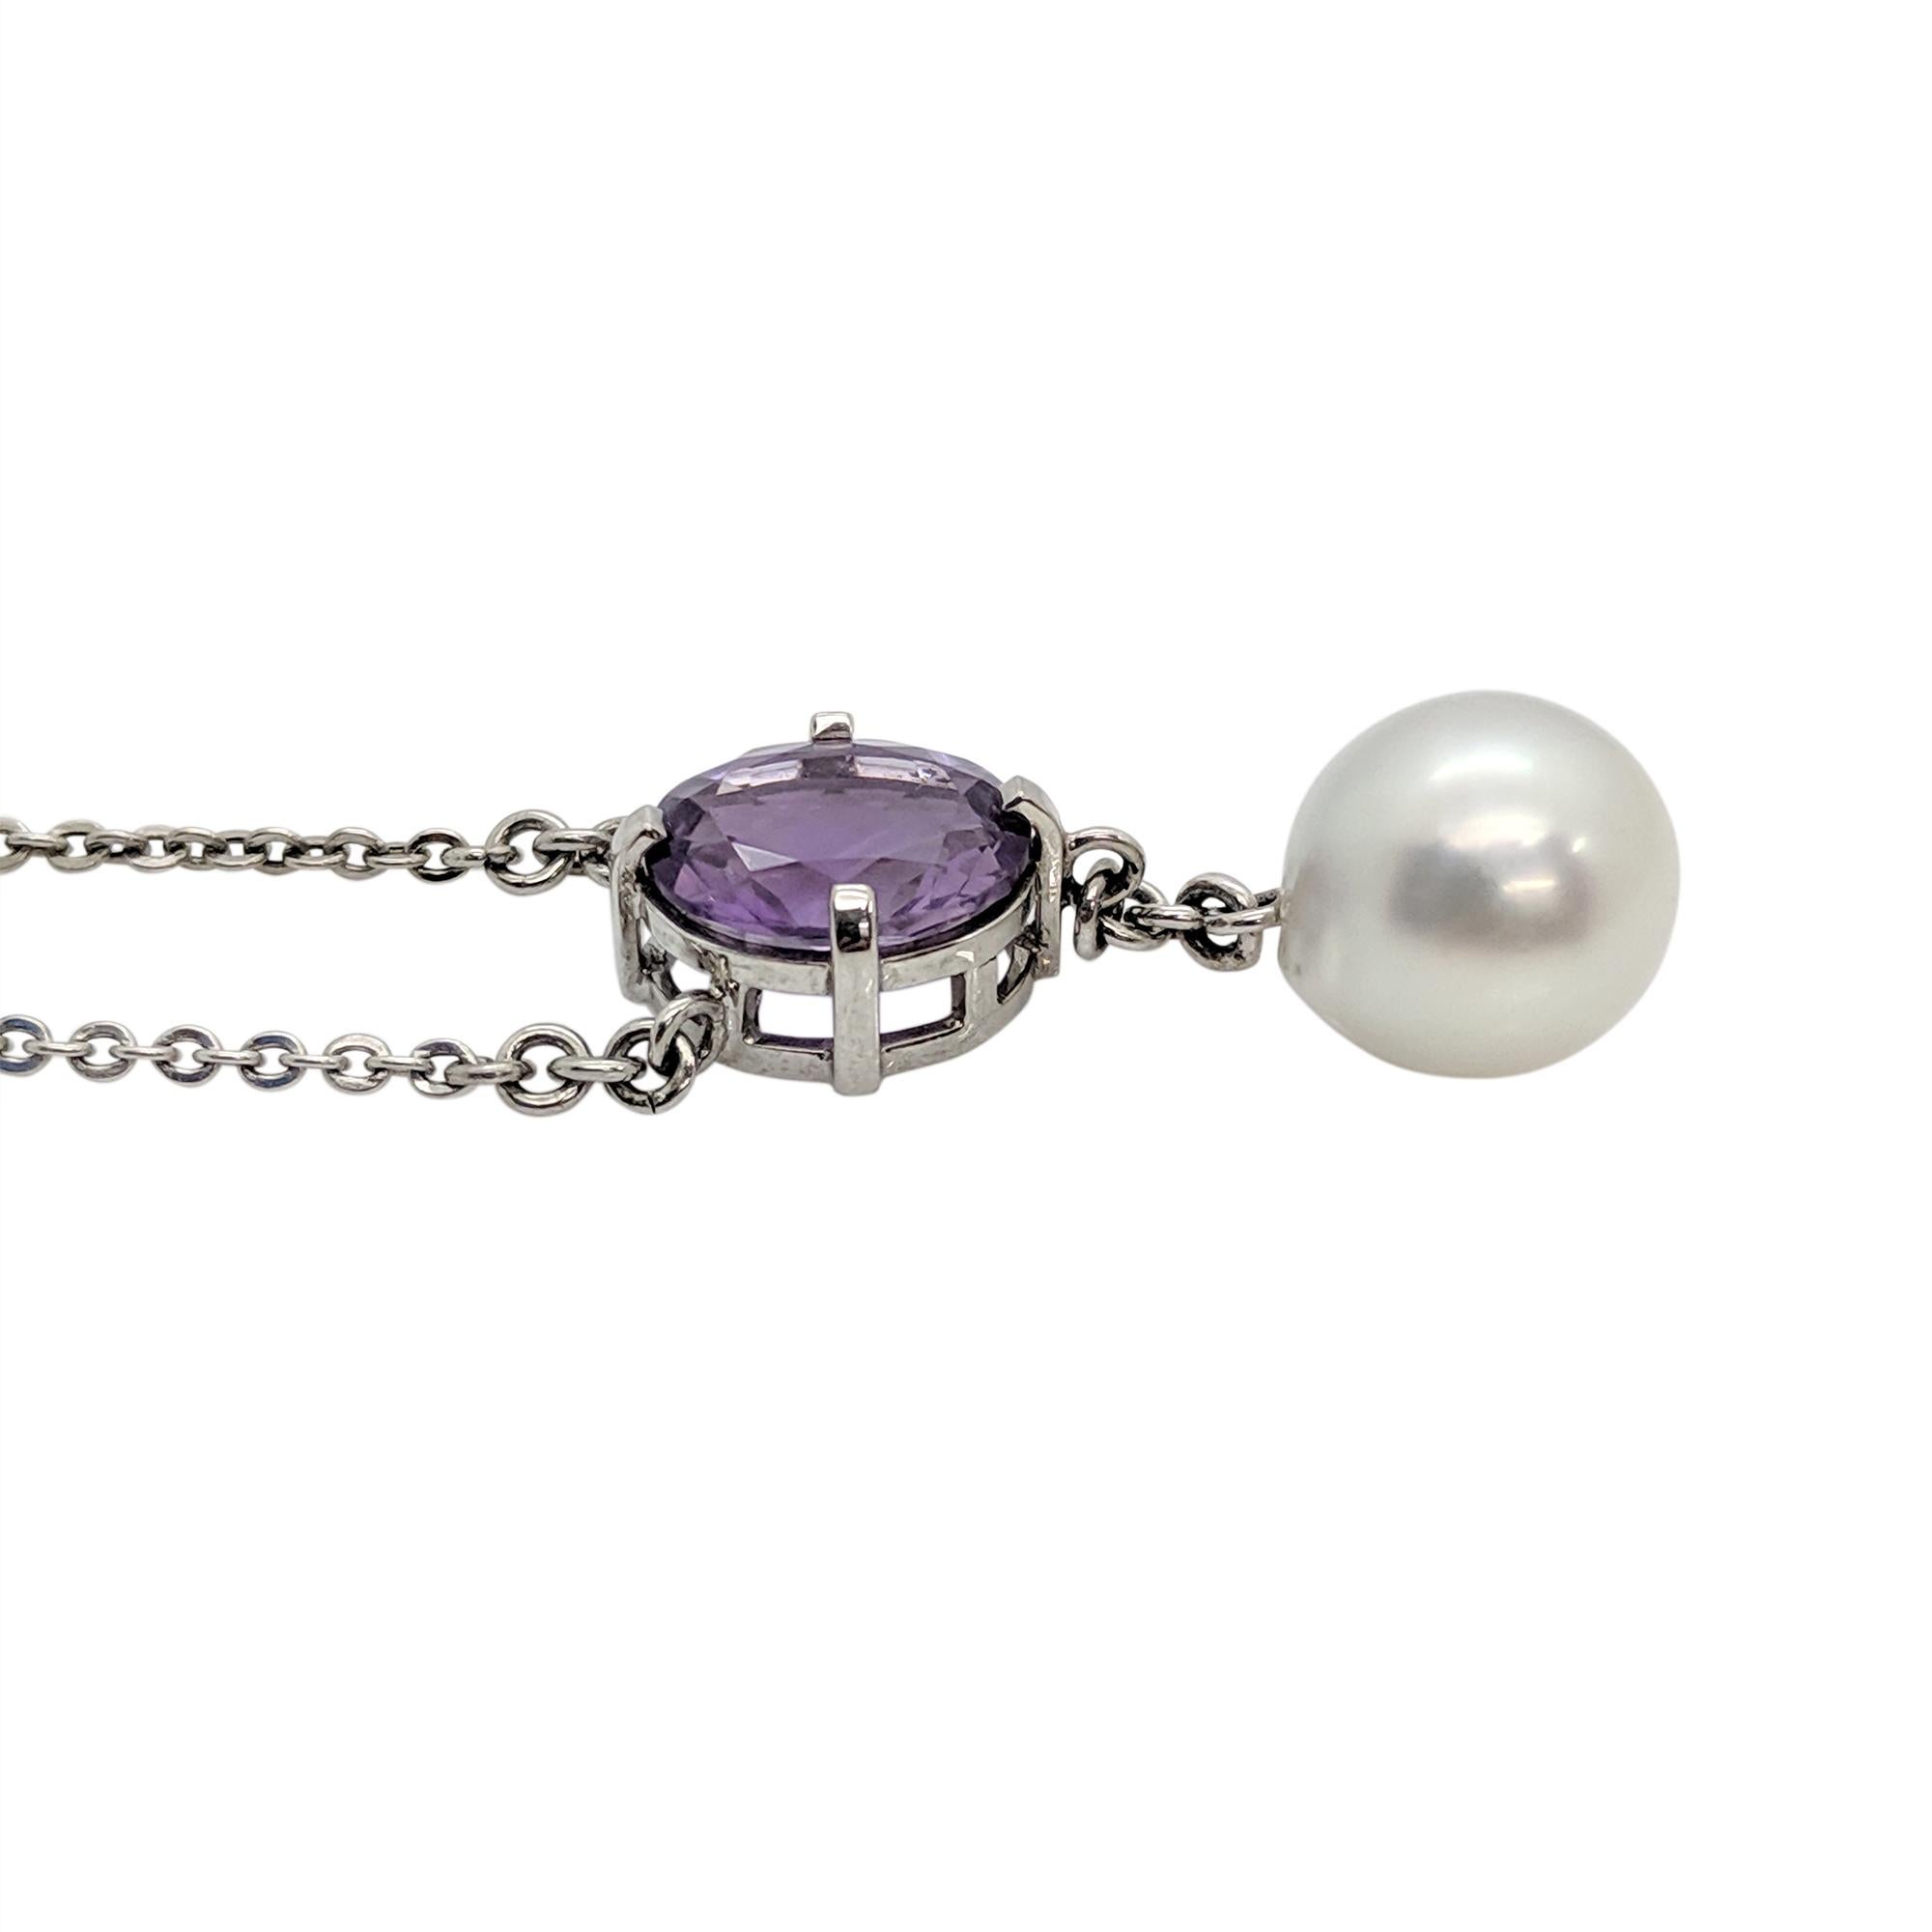  2.57 Carat Oval Cut Amethyst and South Sea Pearl Necklace 18 Carat White Gold In New Condition For Sale In South Perth, AU